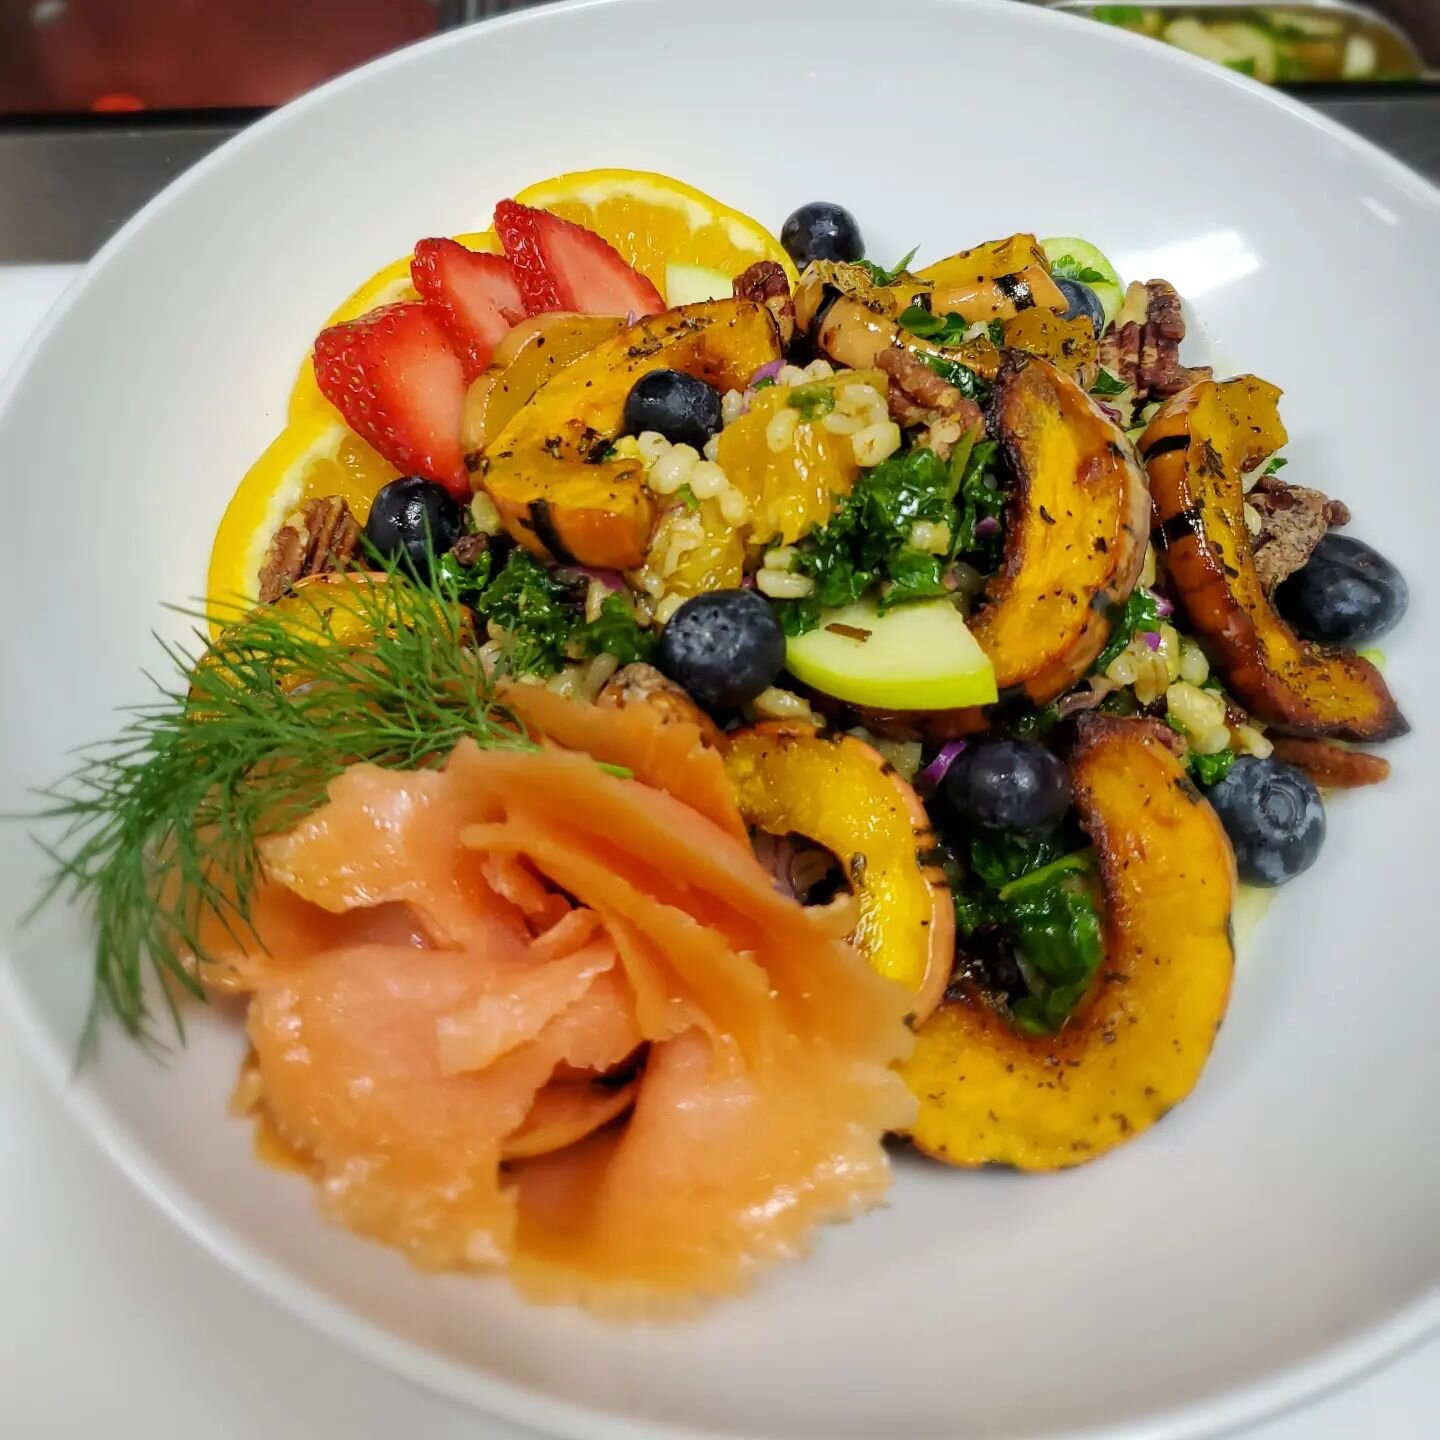 Winter Salad. 💗🍋
Food for your soul.

#thelemontreeofbend #bendoregon #twochefstravels #winter #Wintery  #delicious  #food  #salad #smoke #salmon #yummy
#centraloregon #bendlife #madewithlove 
#barley #kale #fresh #downtownbend